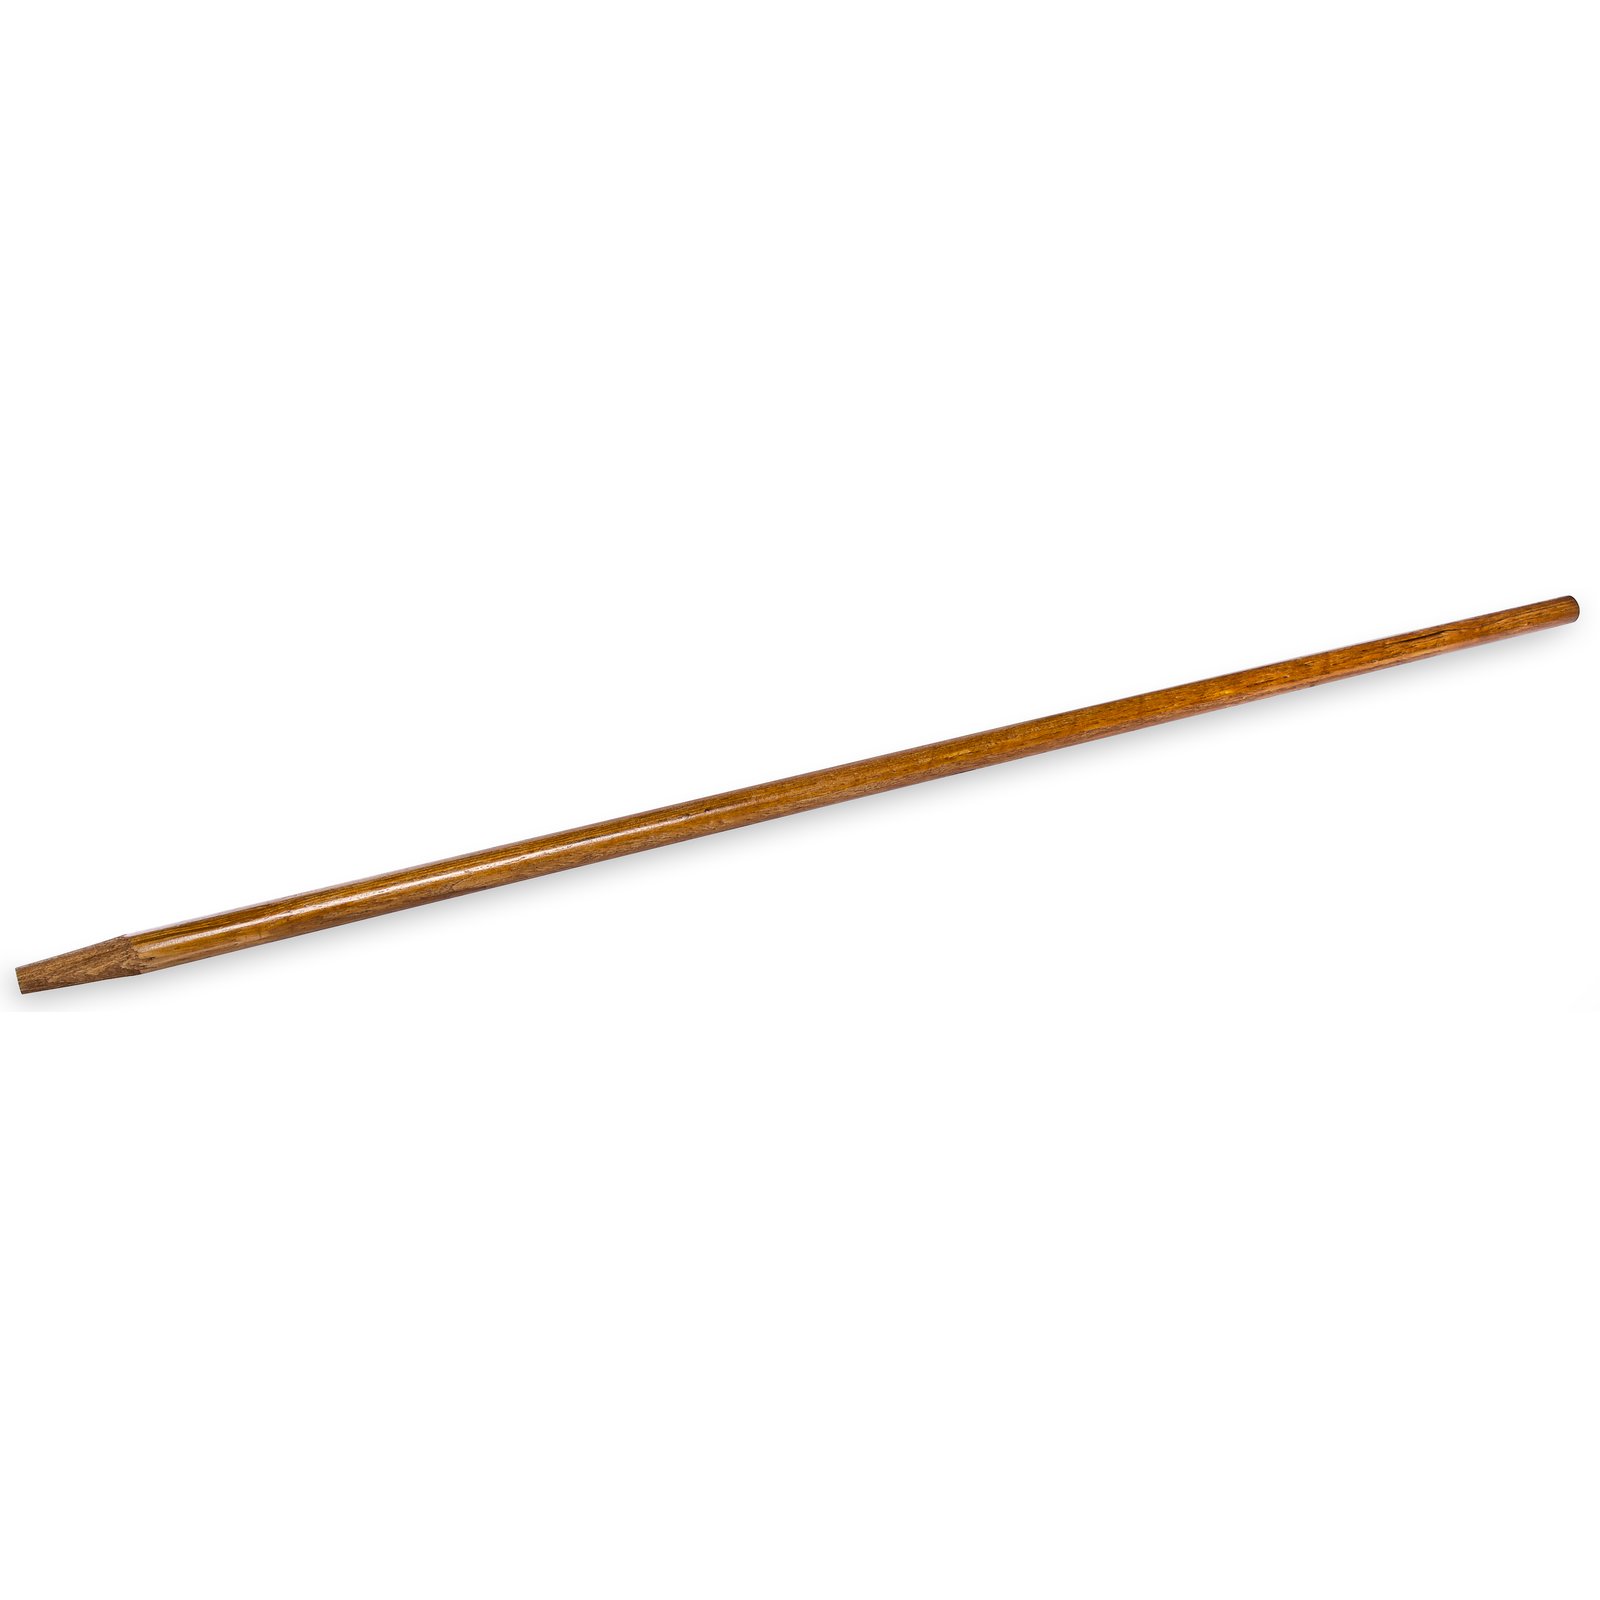 Carlisle FoodService Products 362012500 Tapered Wood Handle, 15 16 Diameter  x 60 Length (Case of 12)